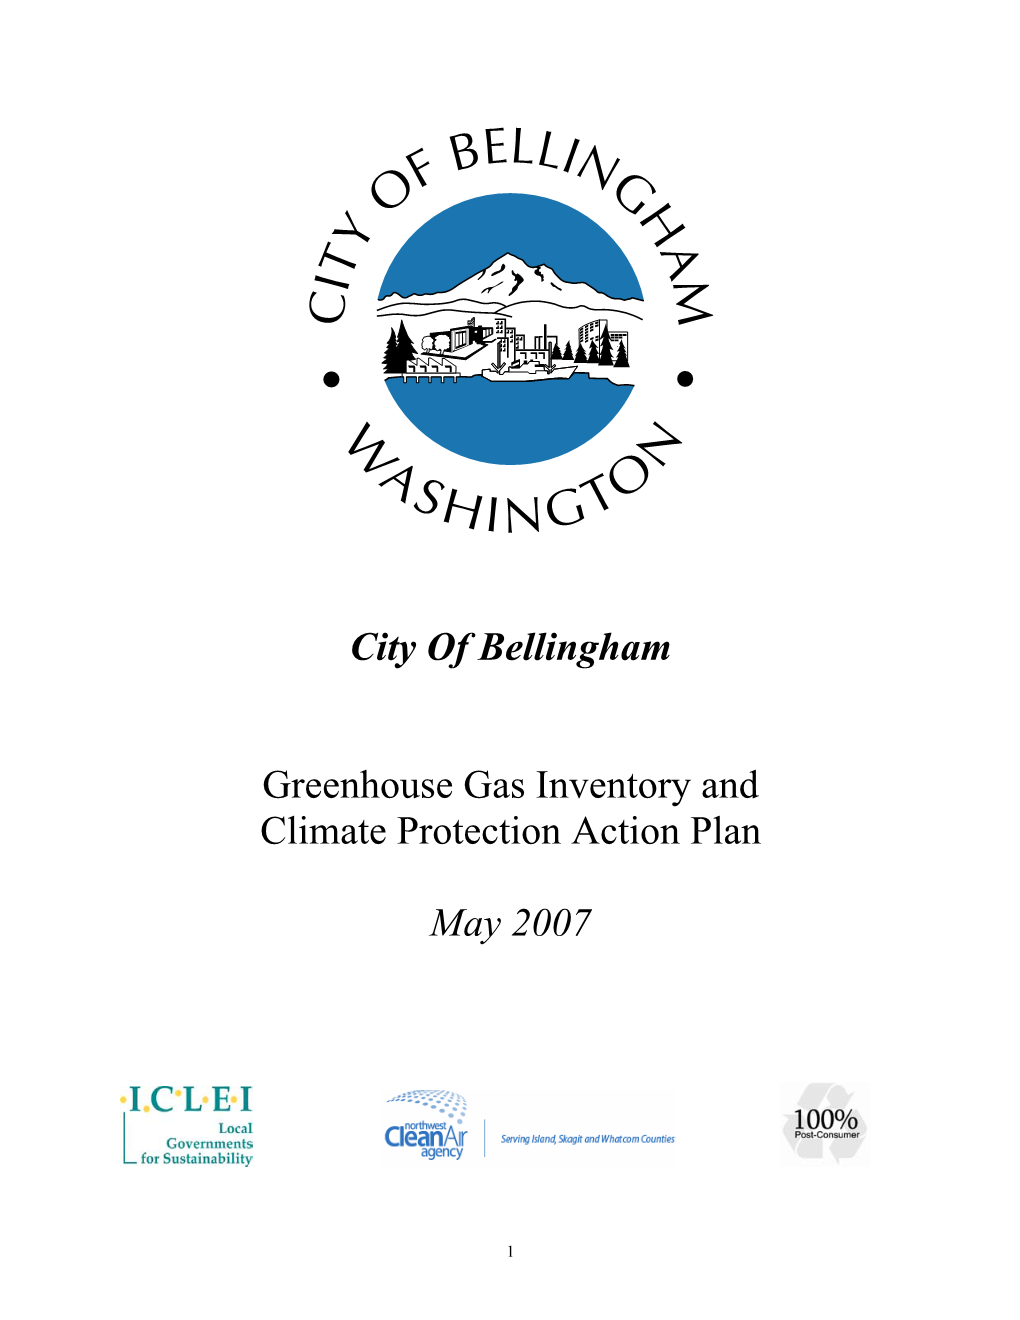 GHG Inventory and Action Plan 4-19-07